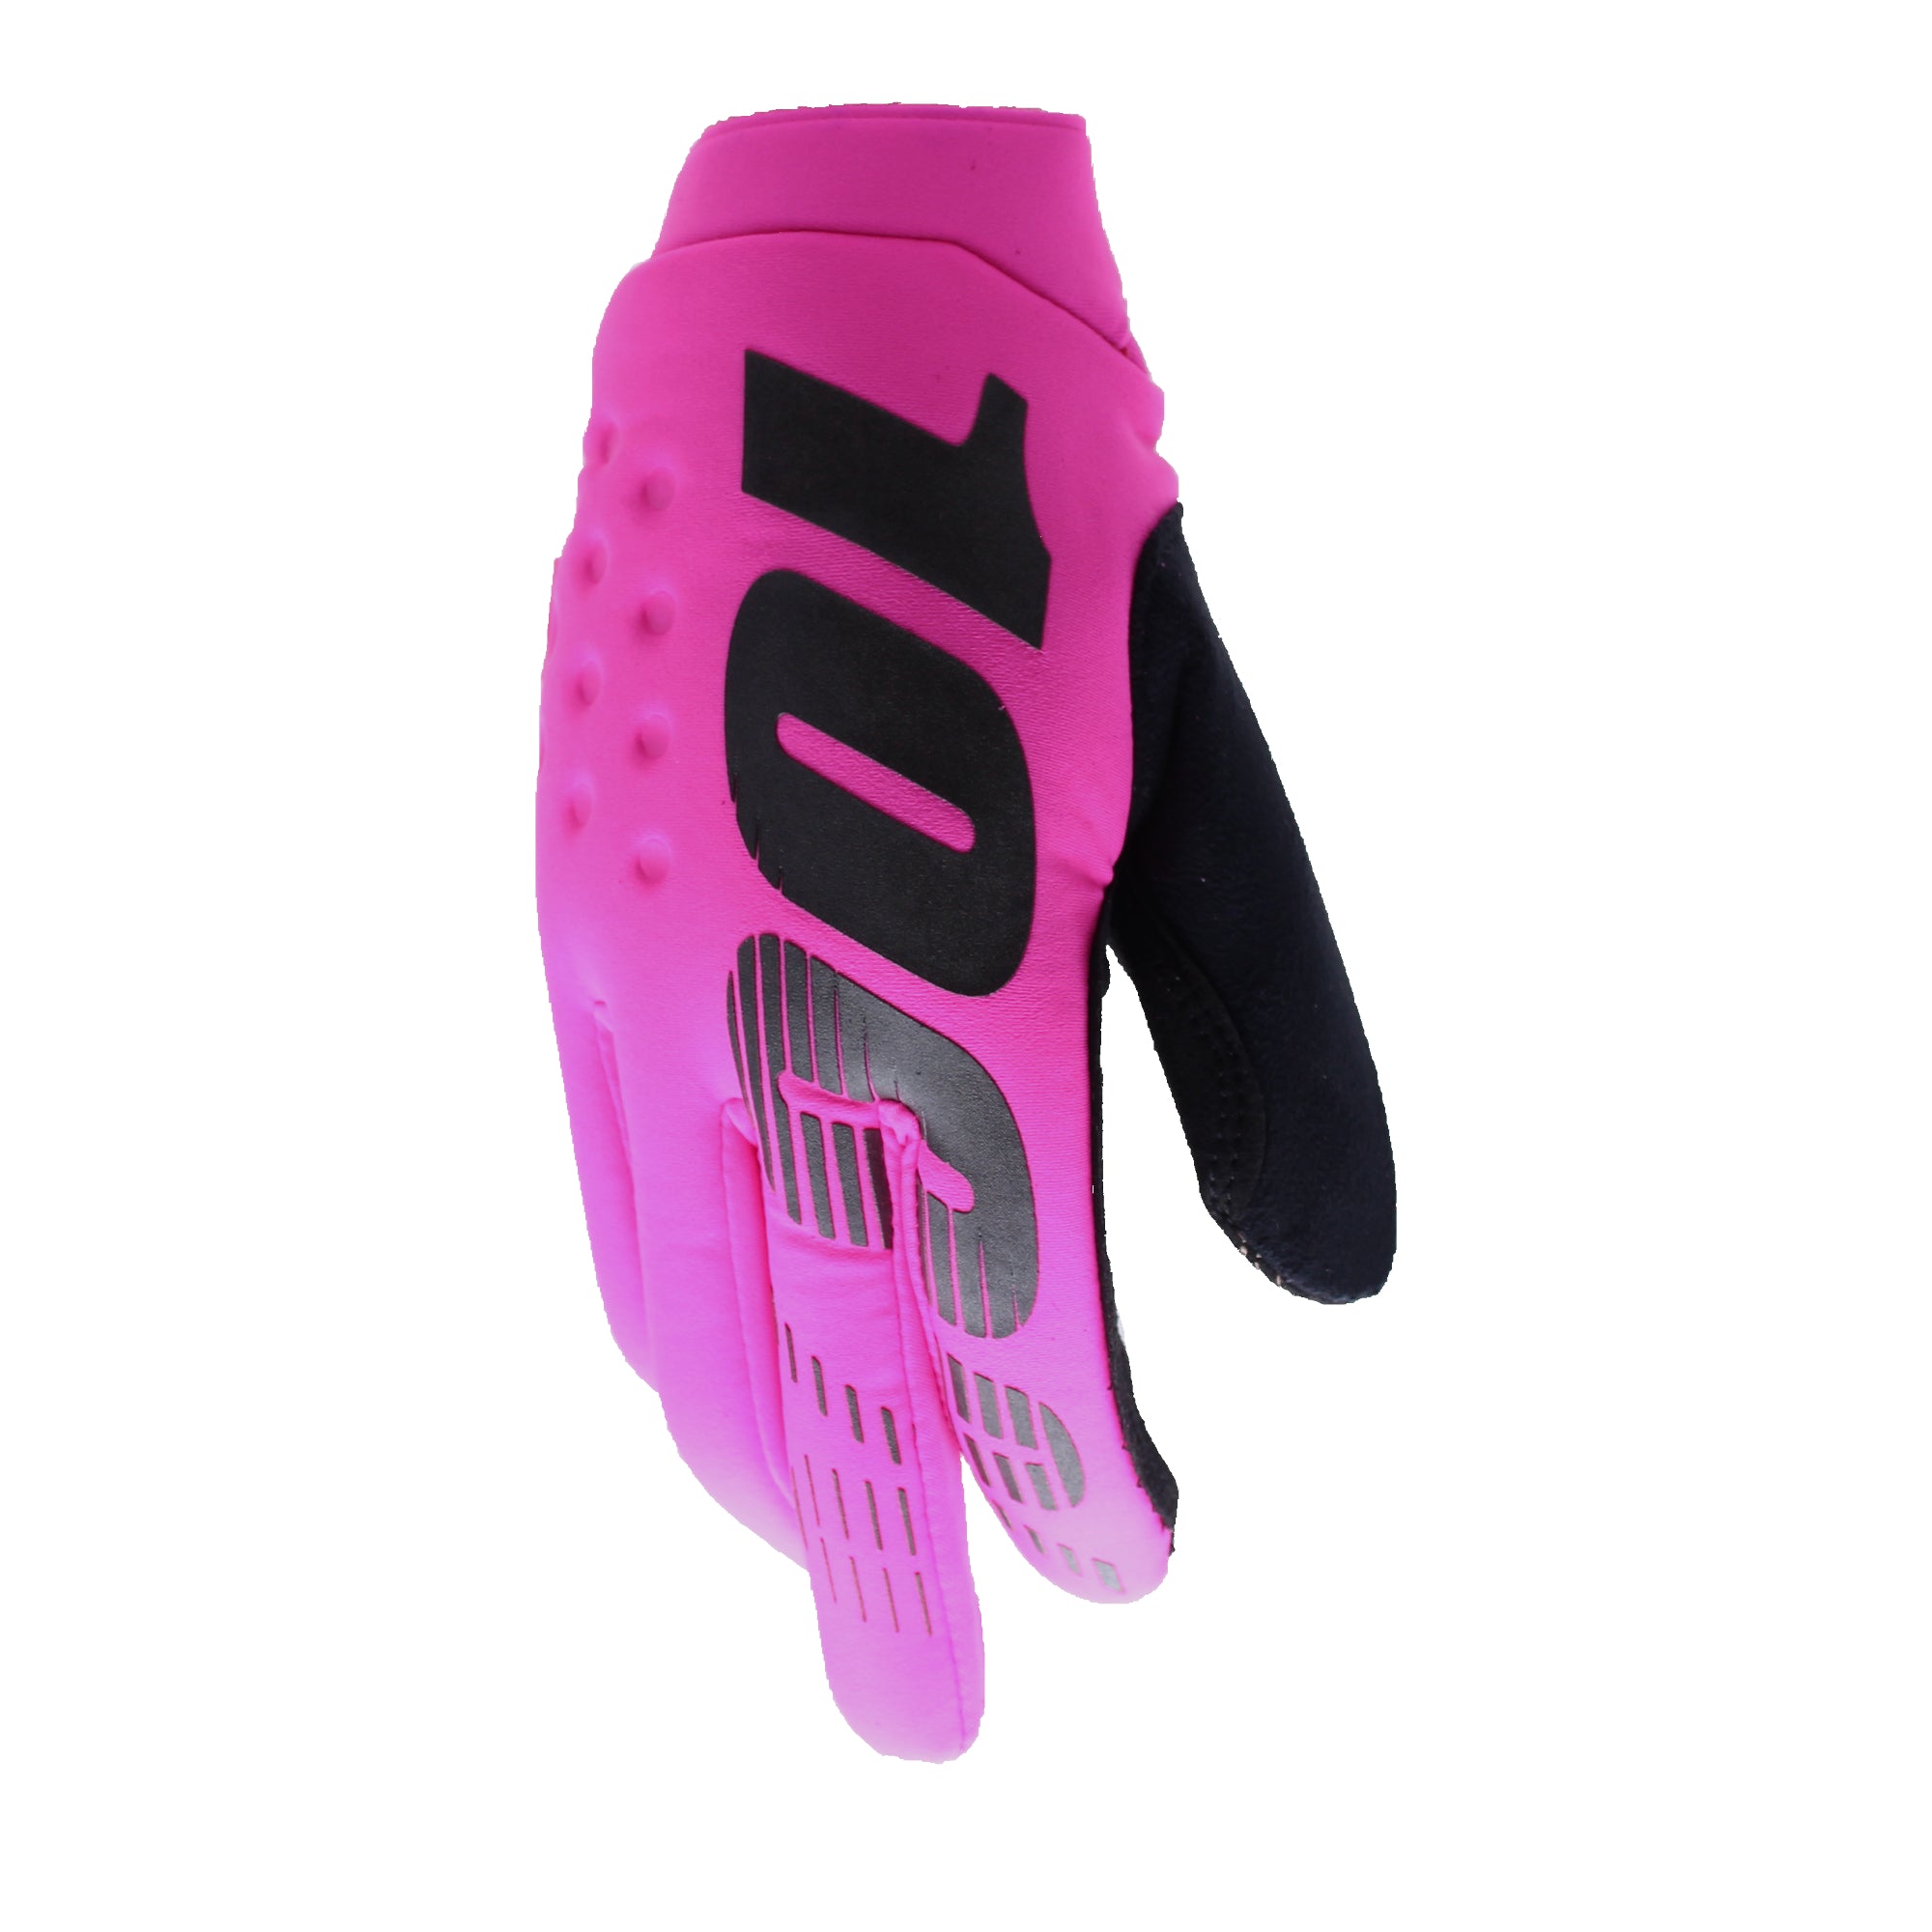 100% Brisker Cold Weather AW21 Kid's Full Finger Cycling Gloves Neon Pink X Large